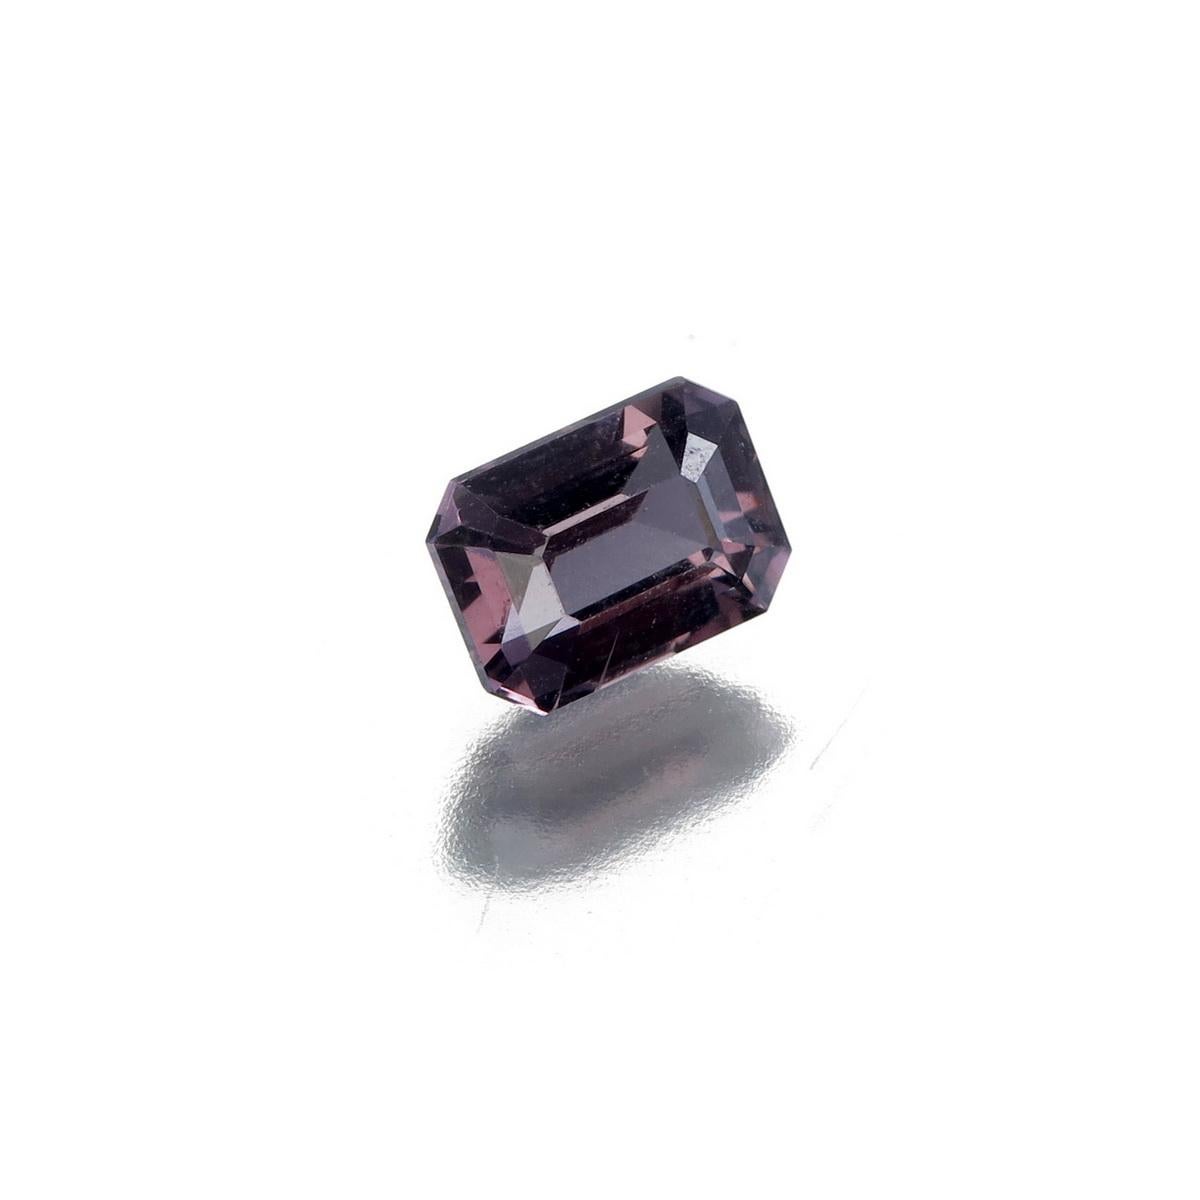 Octagon Cut 1.36 Carat Natural Purple Spinel from Burma No Heat For Sale